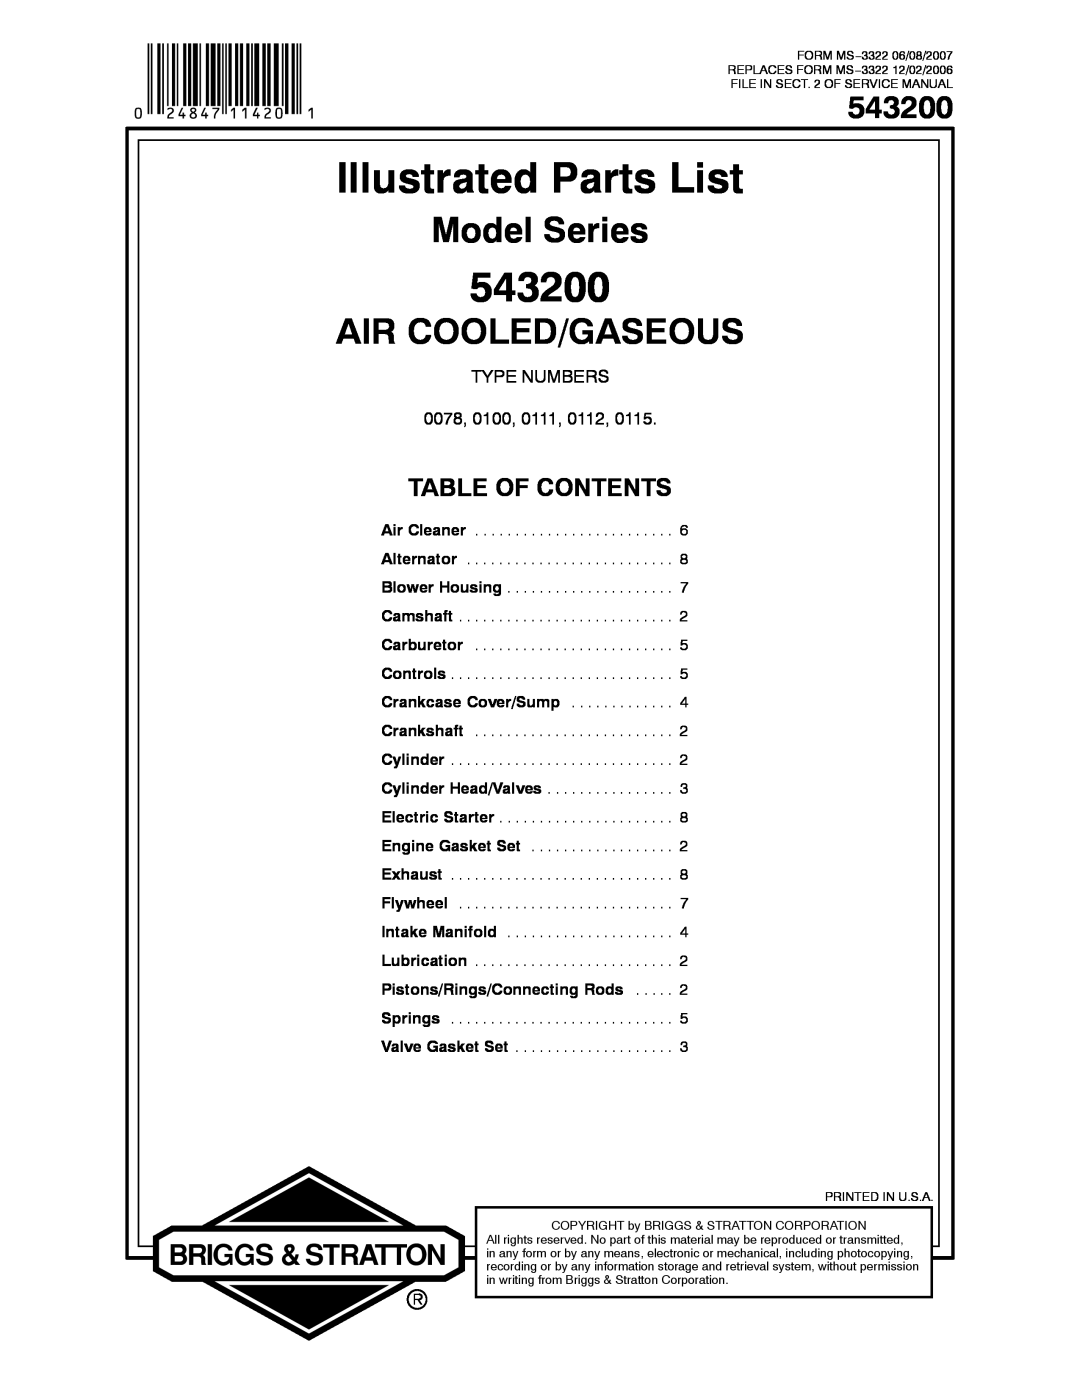 Briggs & Stratton 543200 service manual Illustrated Parts List, Model Series, Air Cooled/Gaseous, Table Of Contents 